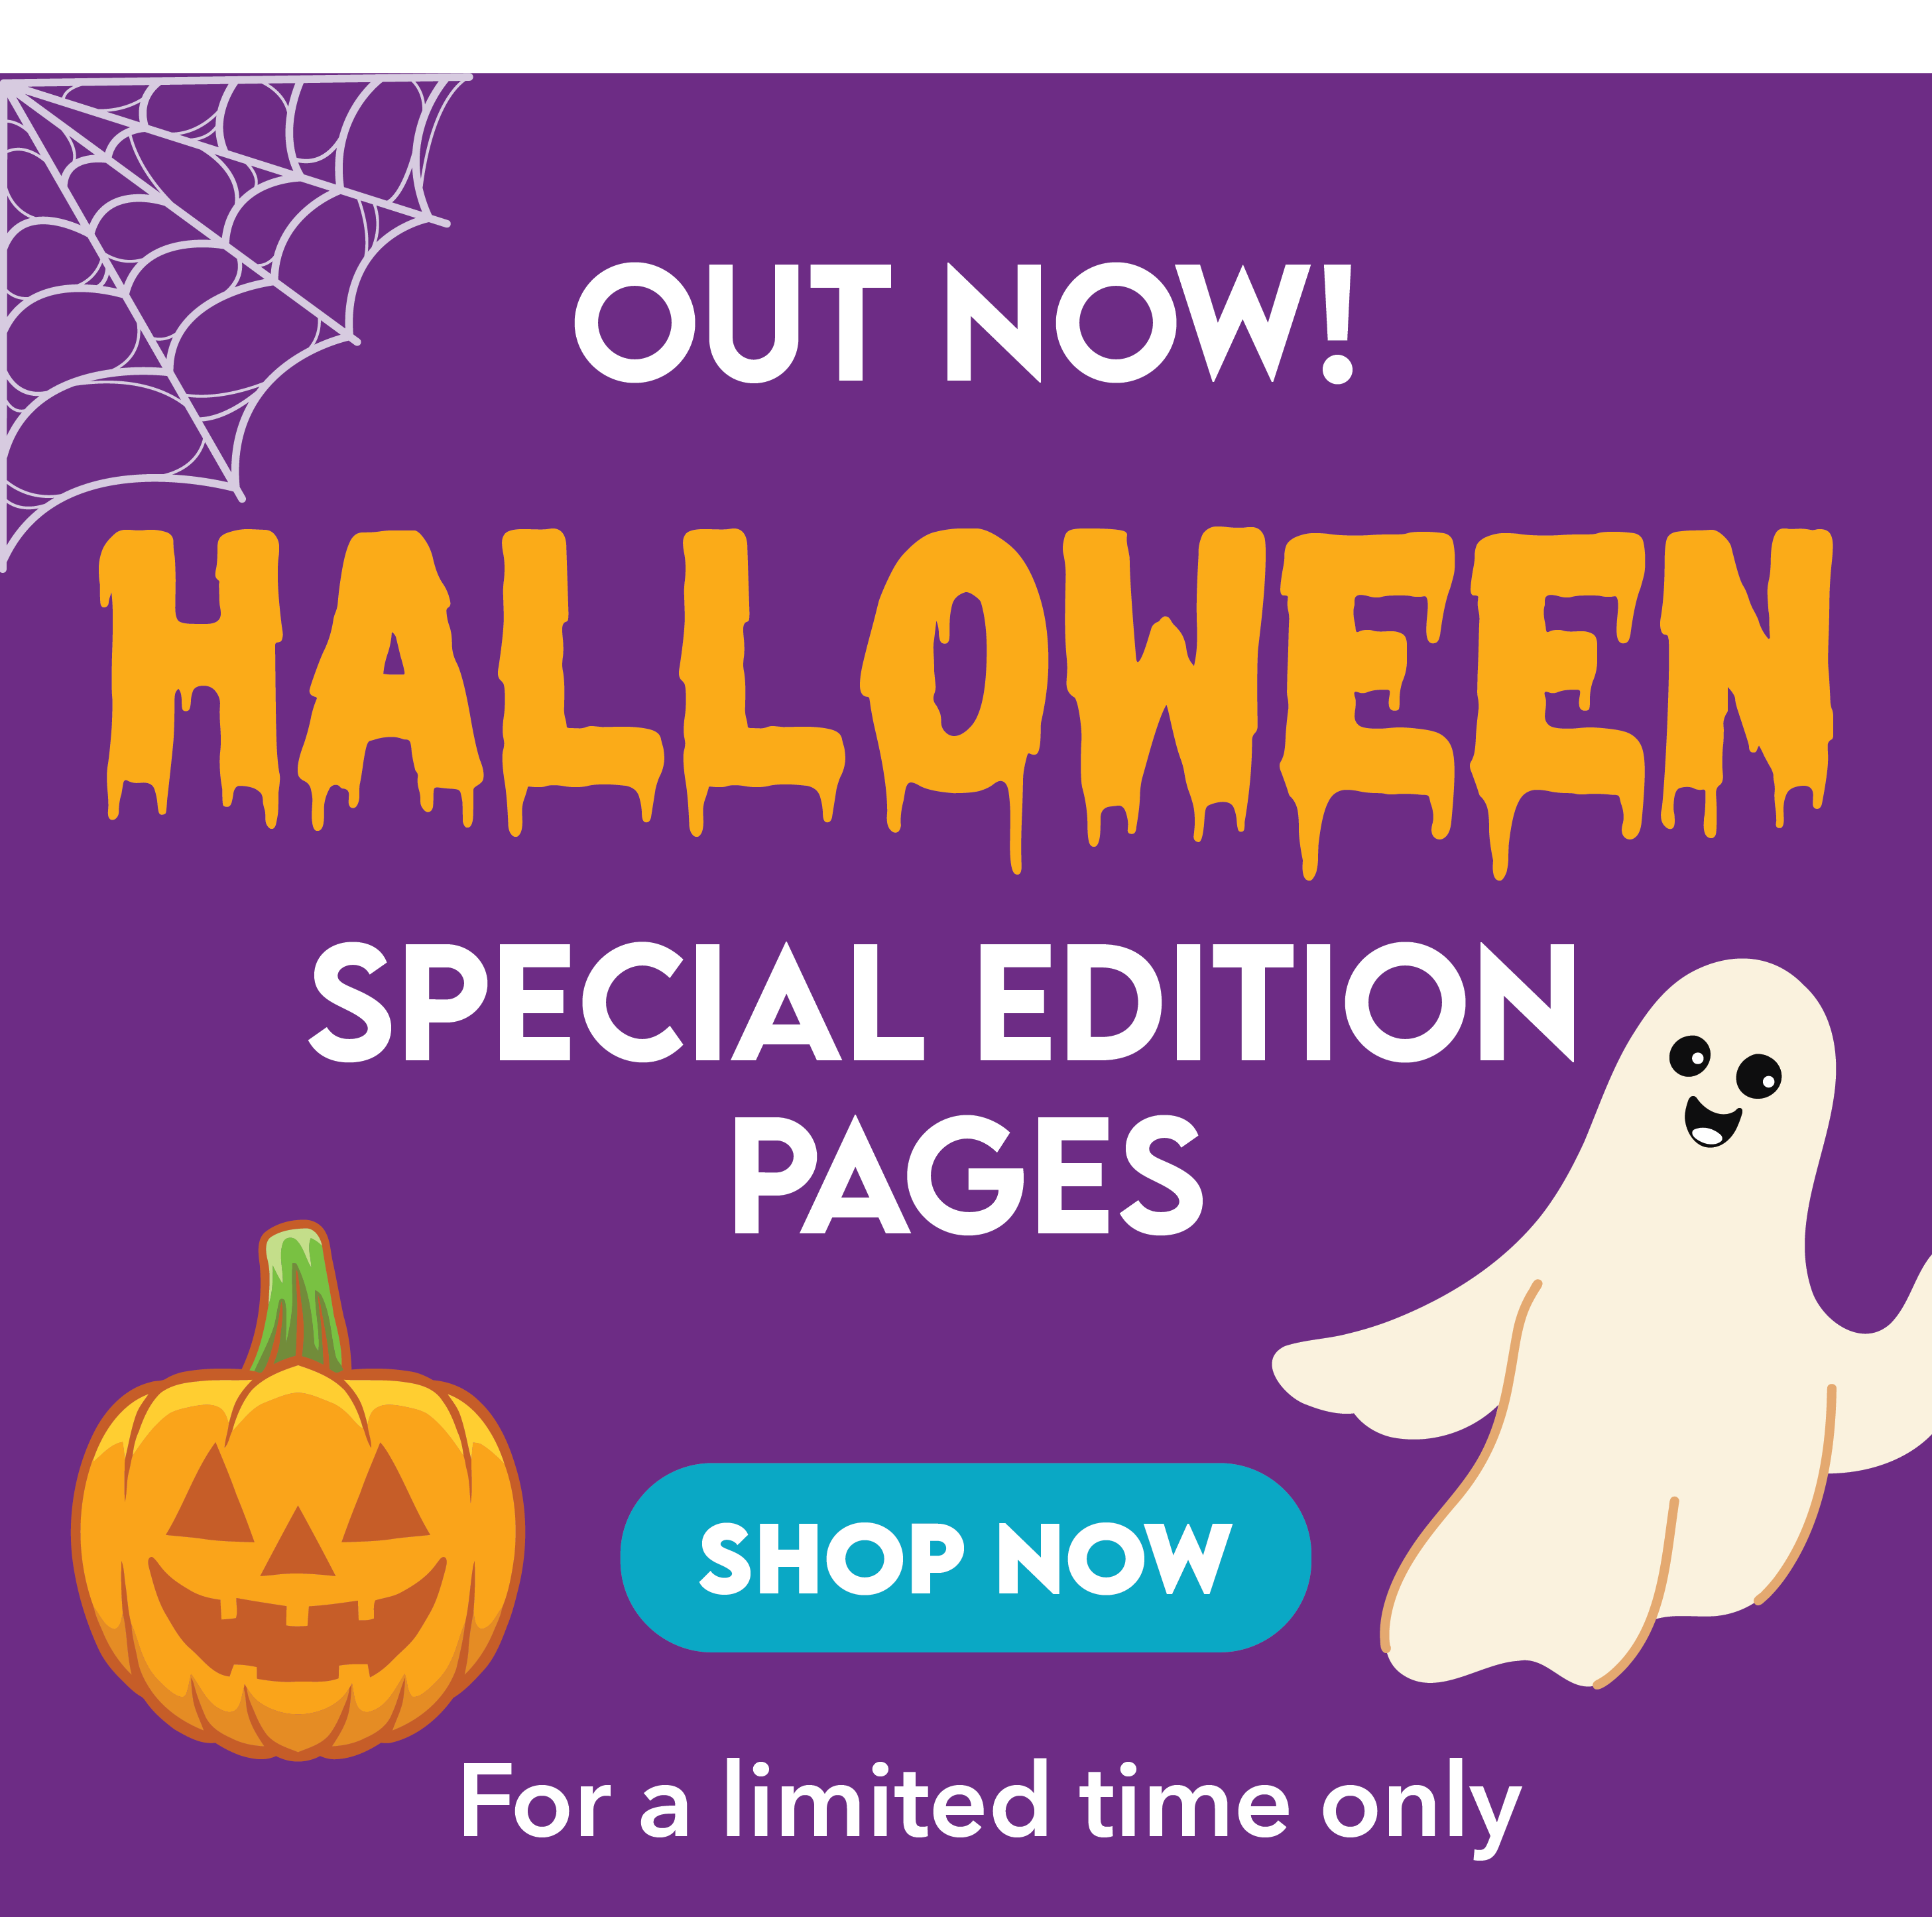 Out now Halloween special edition pages. For a limited time only